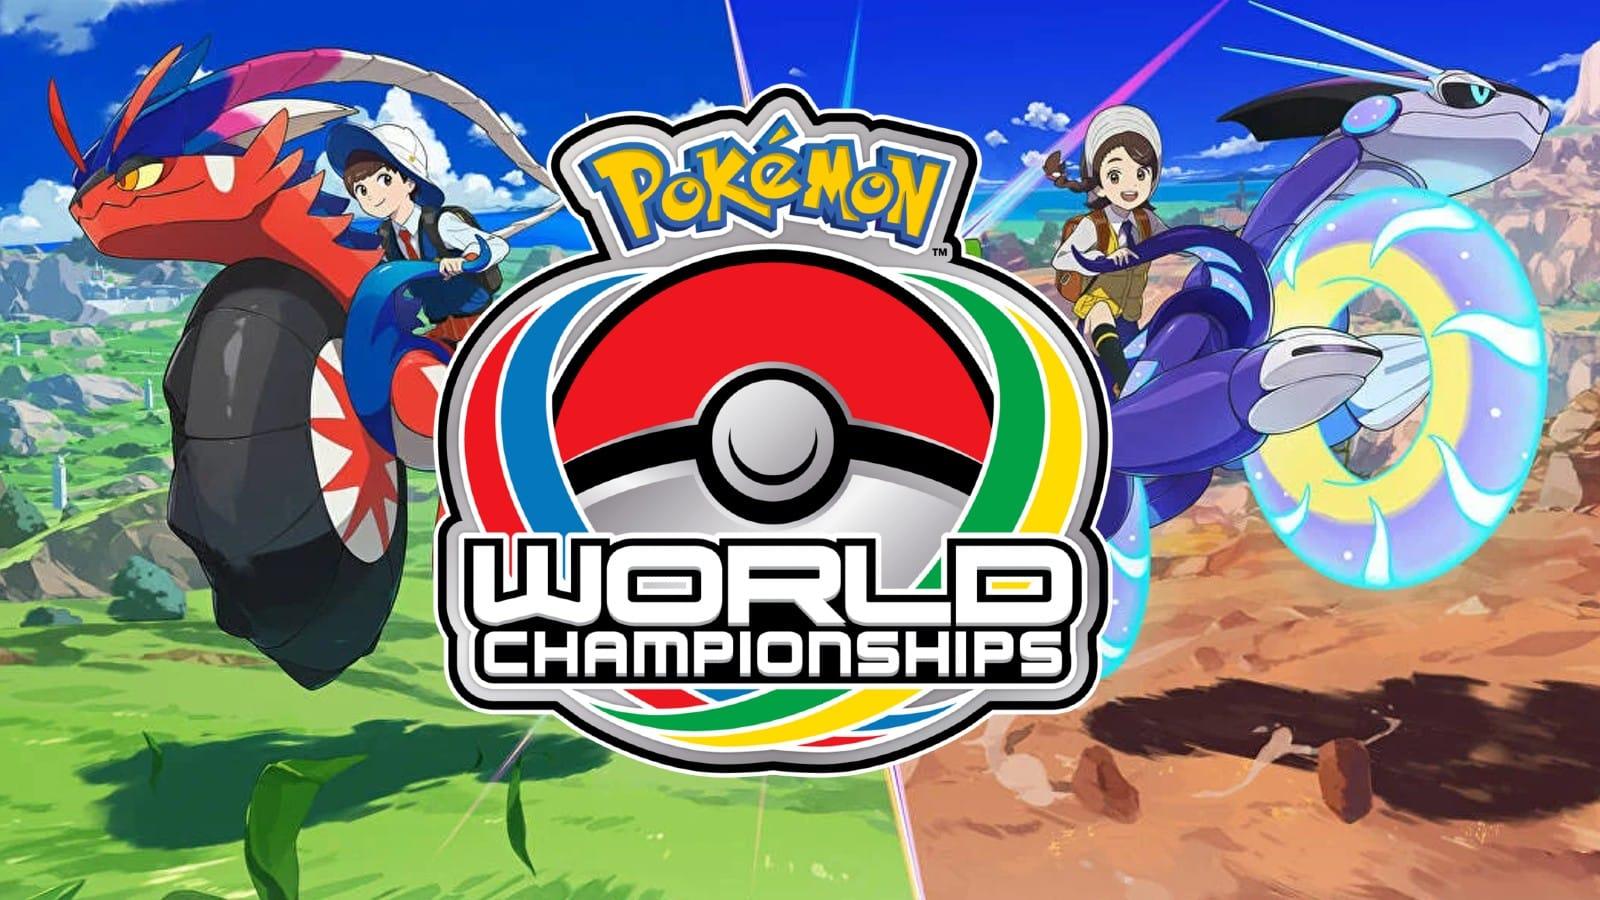 Pokémon World Championships 2023 Gets Animated Commercial by CoMix